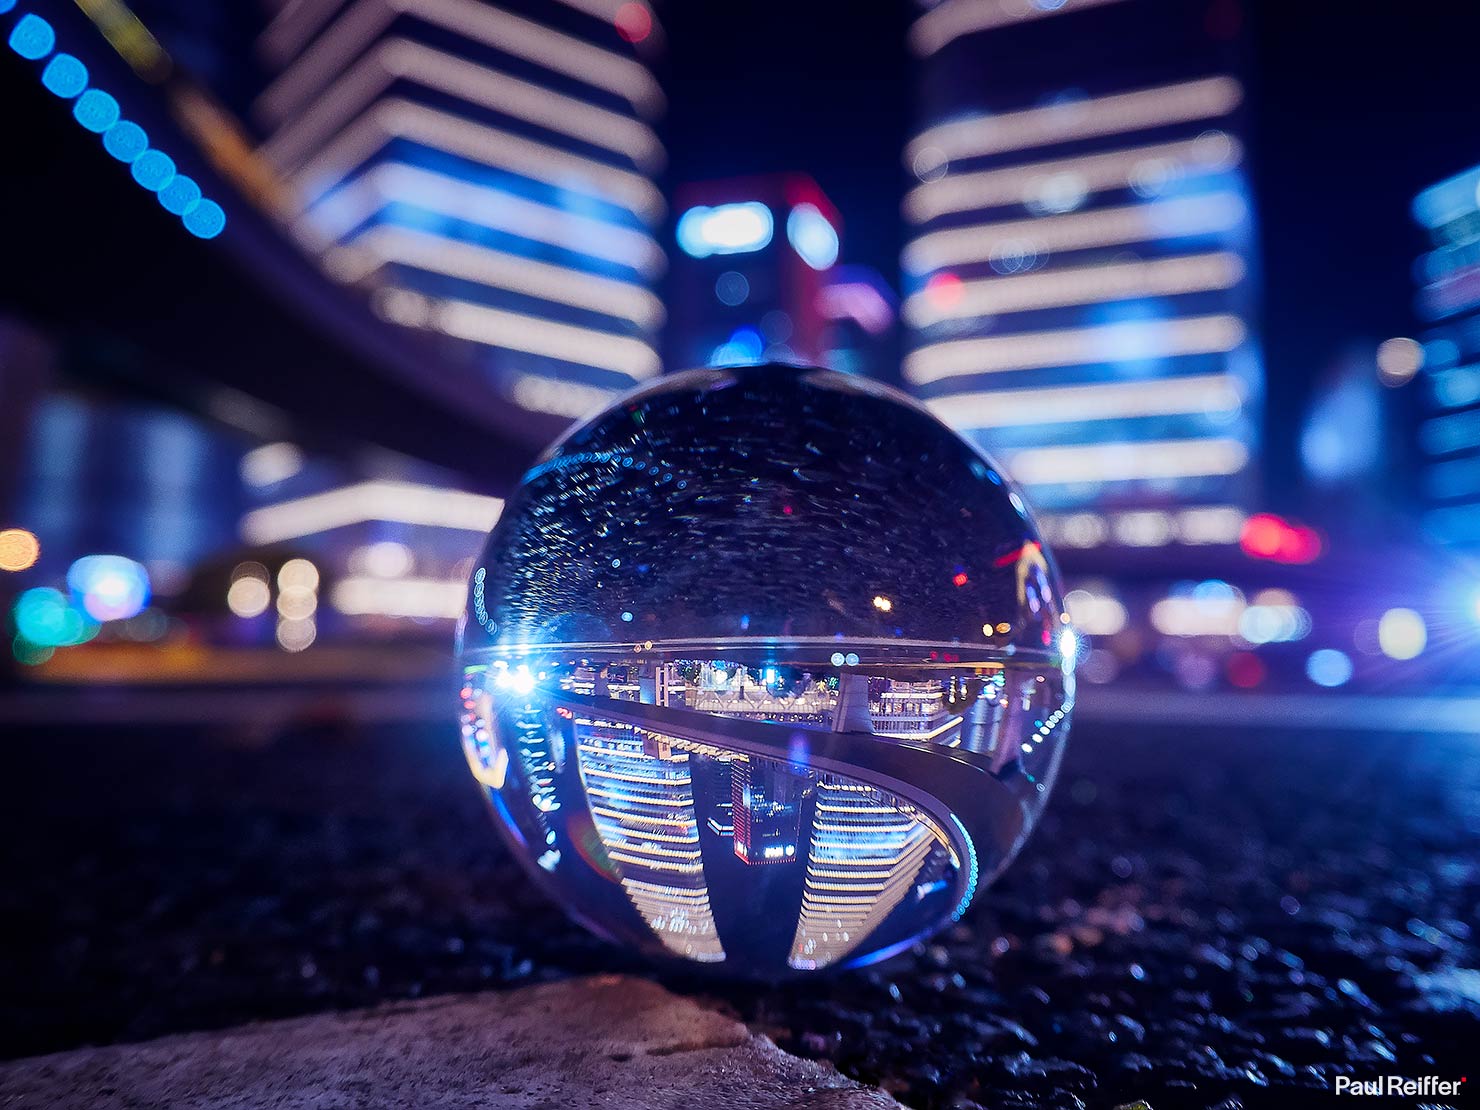 Shanghai Lujiazui Underpass Glass Ball Lensball Photography Cityscape Night Paul Reiffer Photographer Professional Guide How To